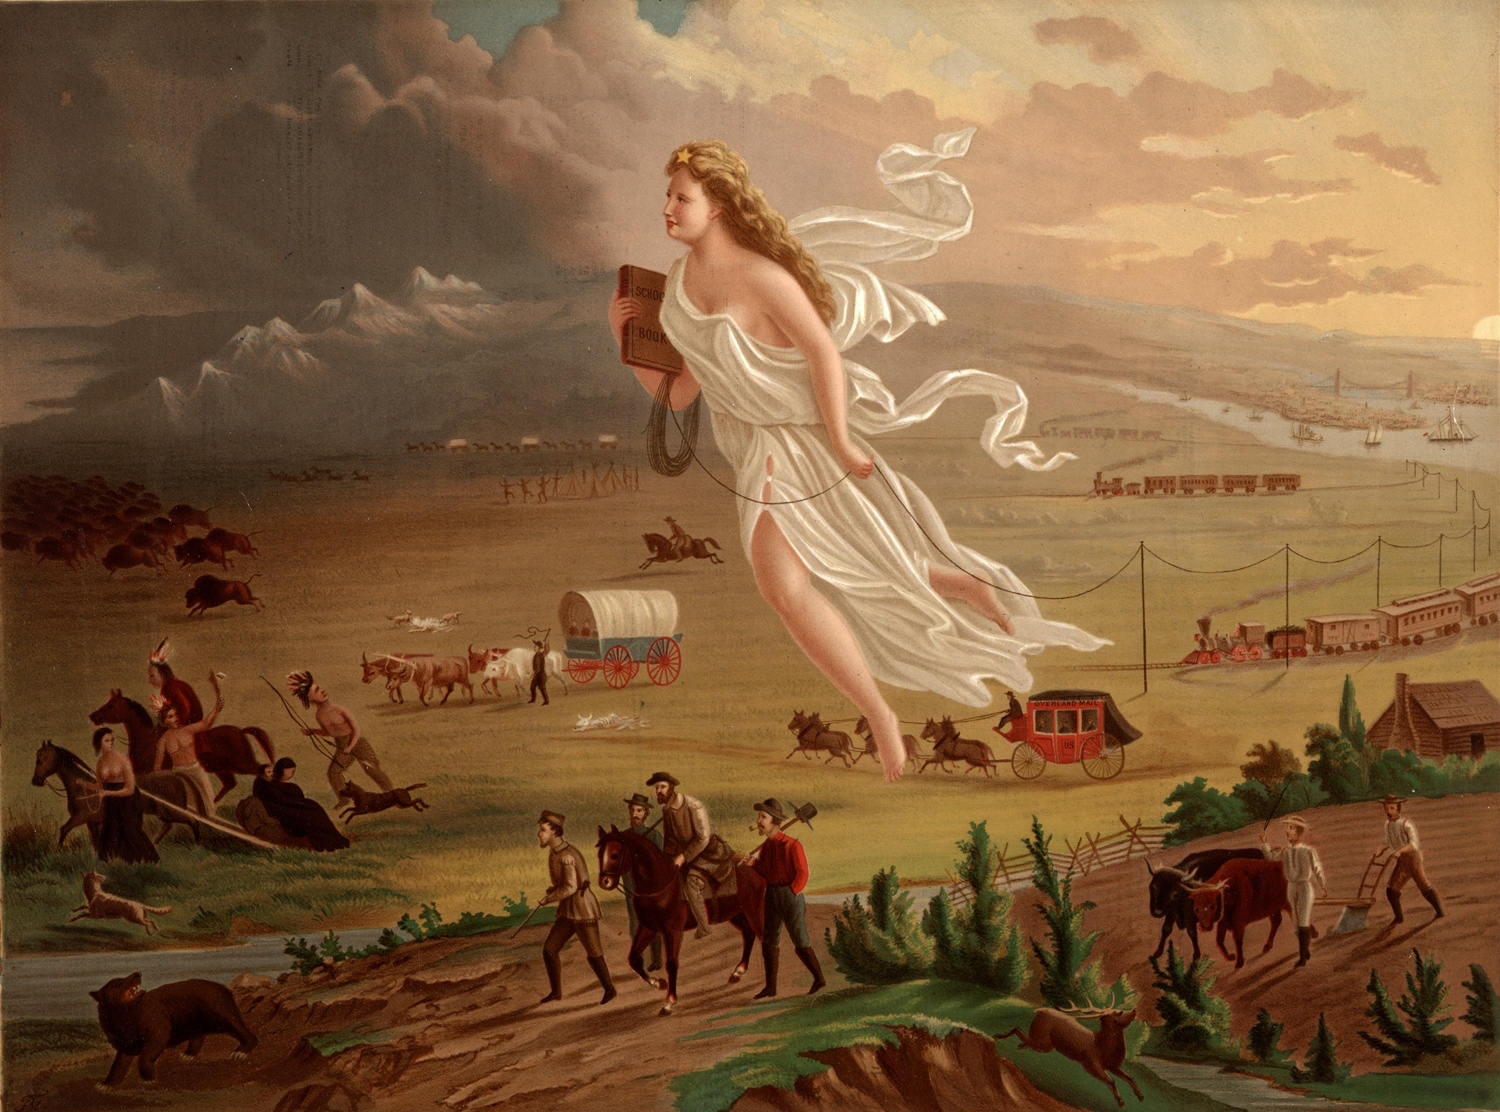 In this allegorical illustration of Manifest Destiny named American Progress (1872), John Gast depicts the modernization of the wild west. Columbia, a personification of the United States, is shown leading civilization westward with the American settlers.